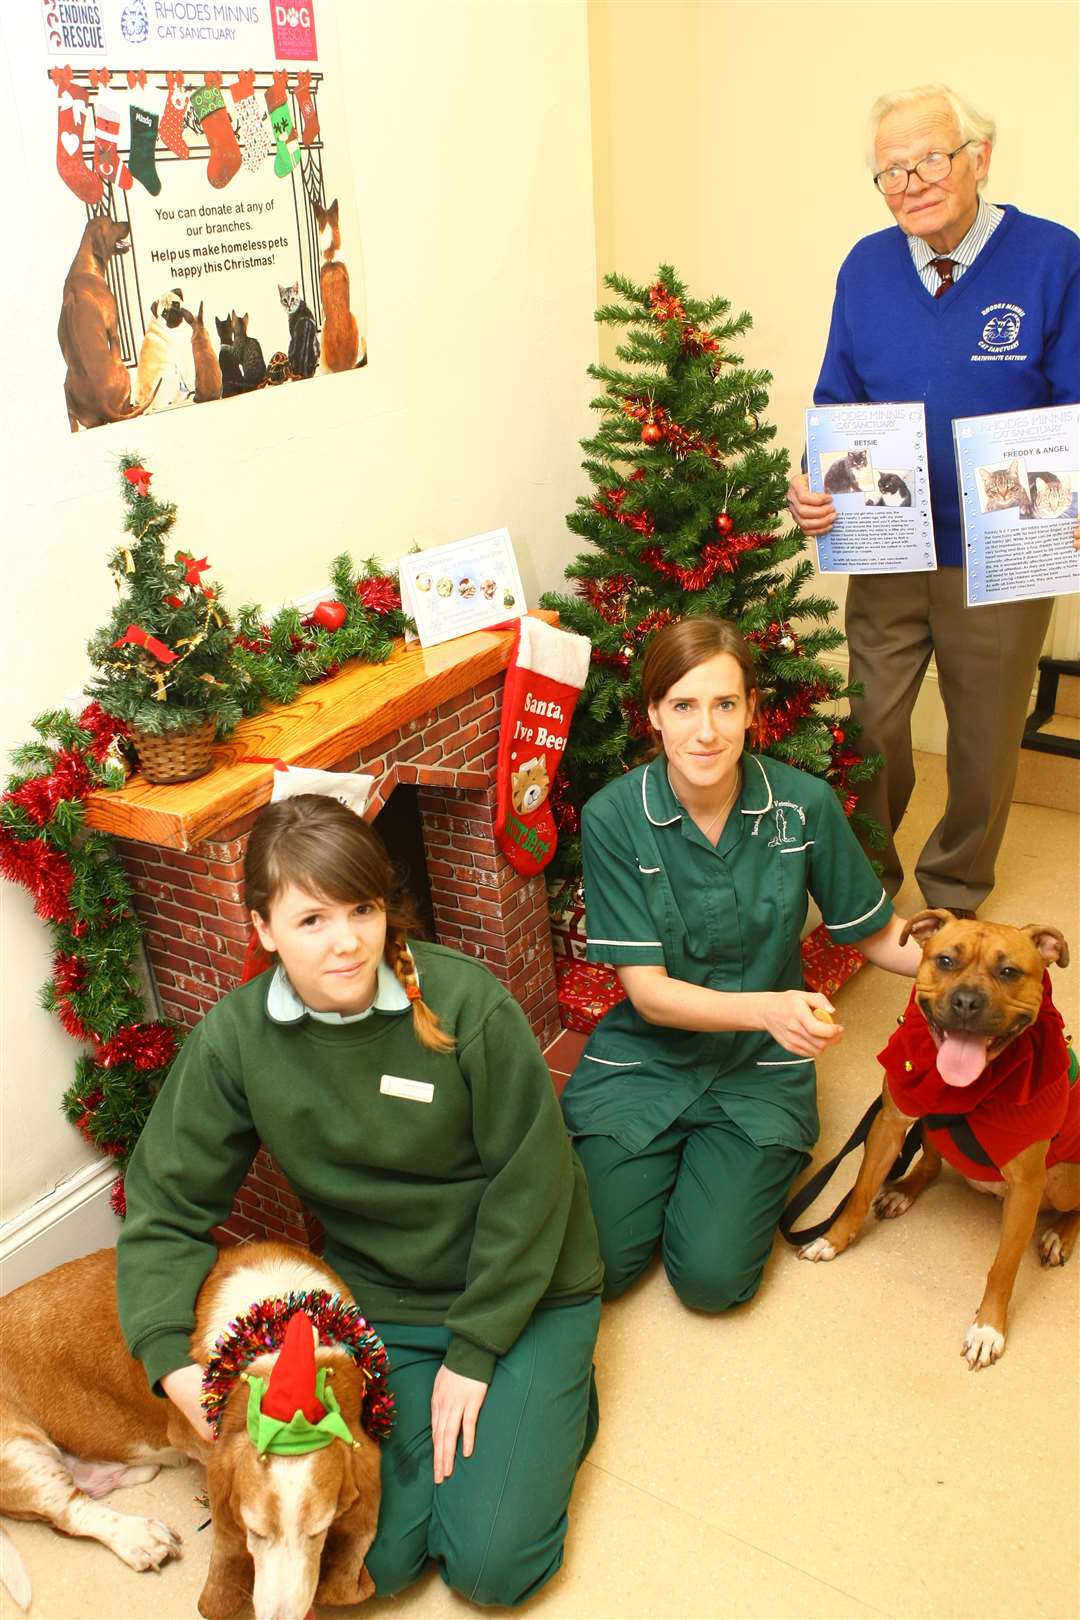 Burnham House Veterinary Surgery is 'stocking up for Christmas'